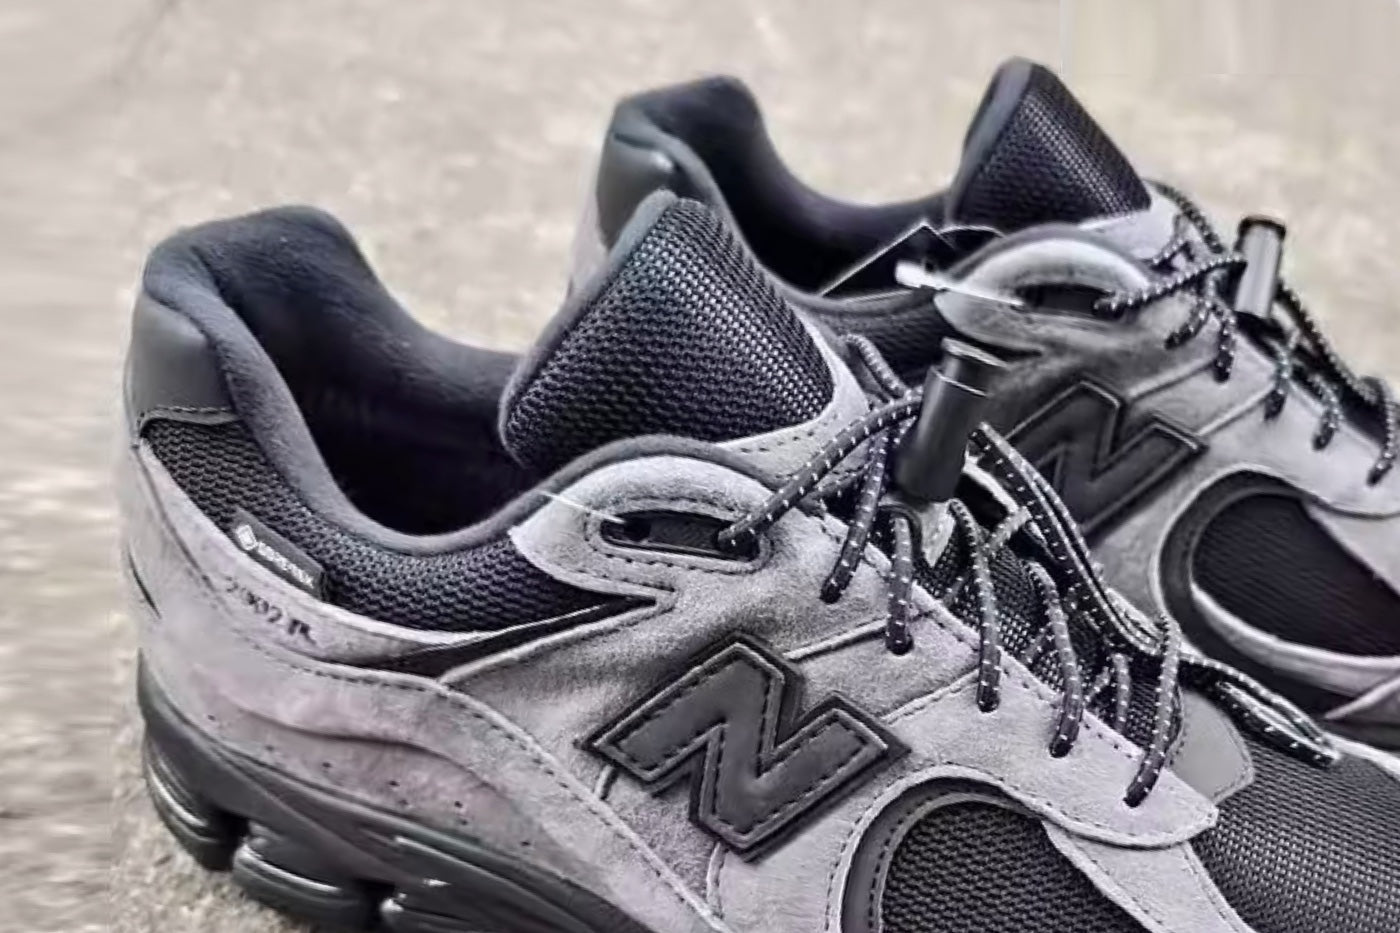 The JJJJound x New Balance 2002R Gore-Tex "Grey" is Ready for Anything